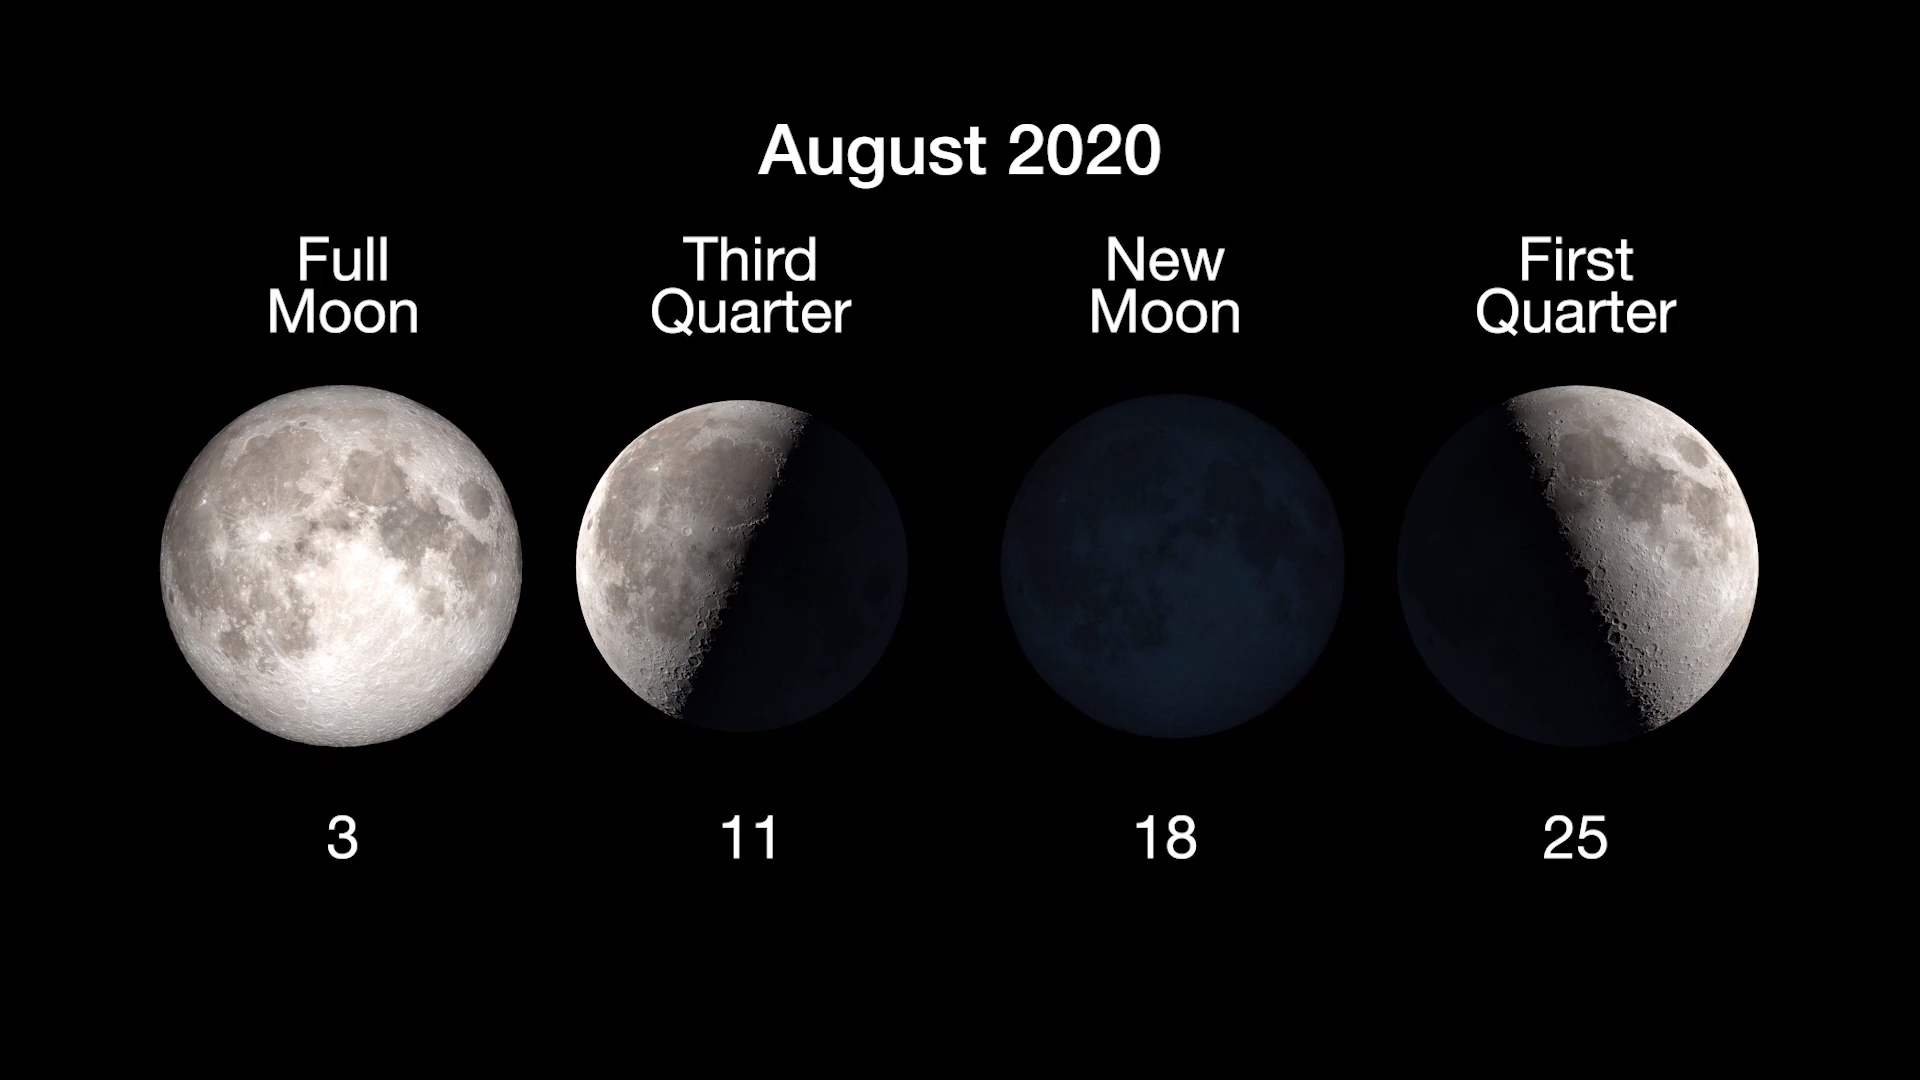 Graphic showing dates for the different phases of the Moon in August 2020.